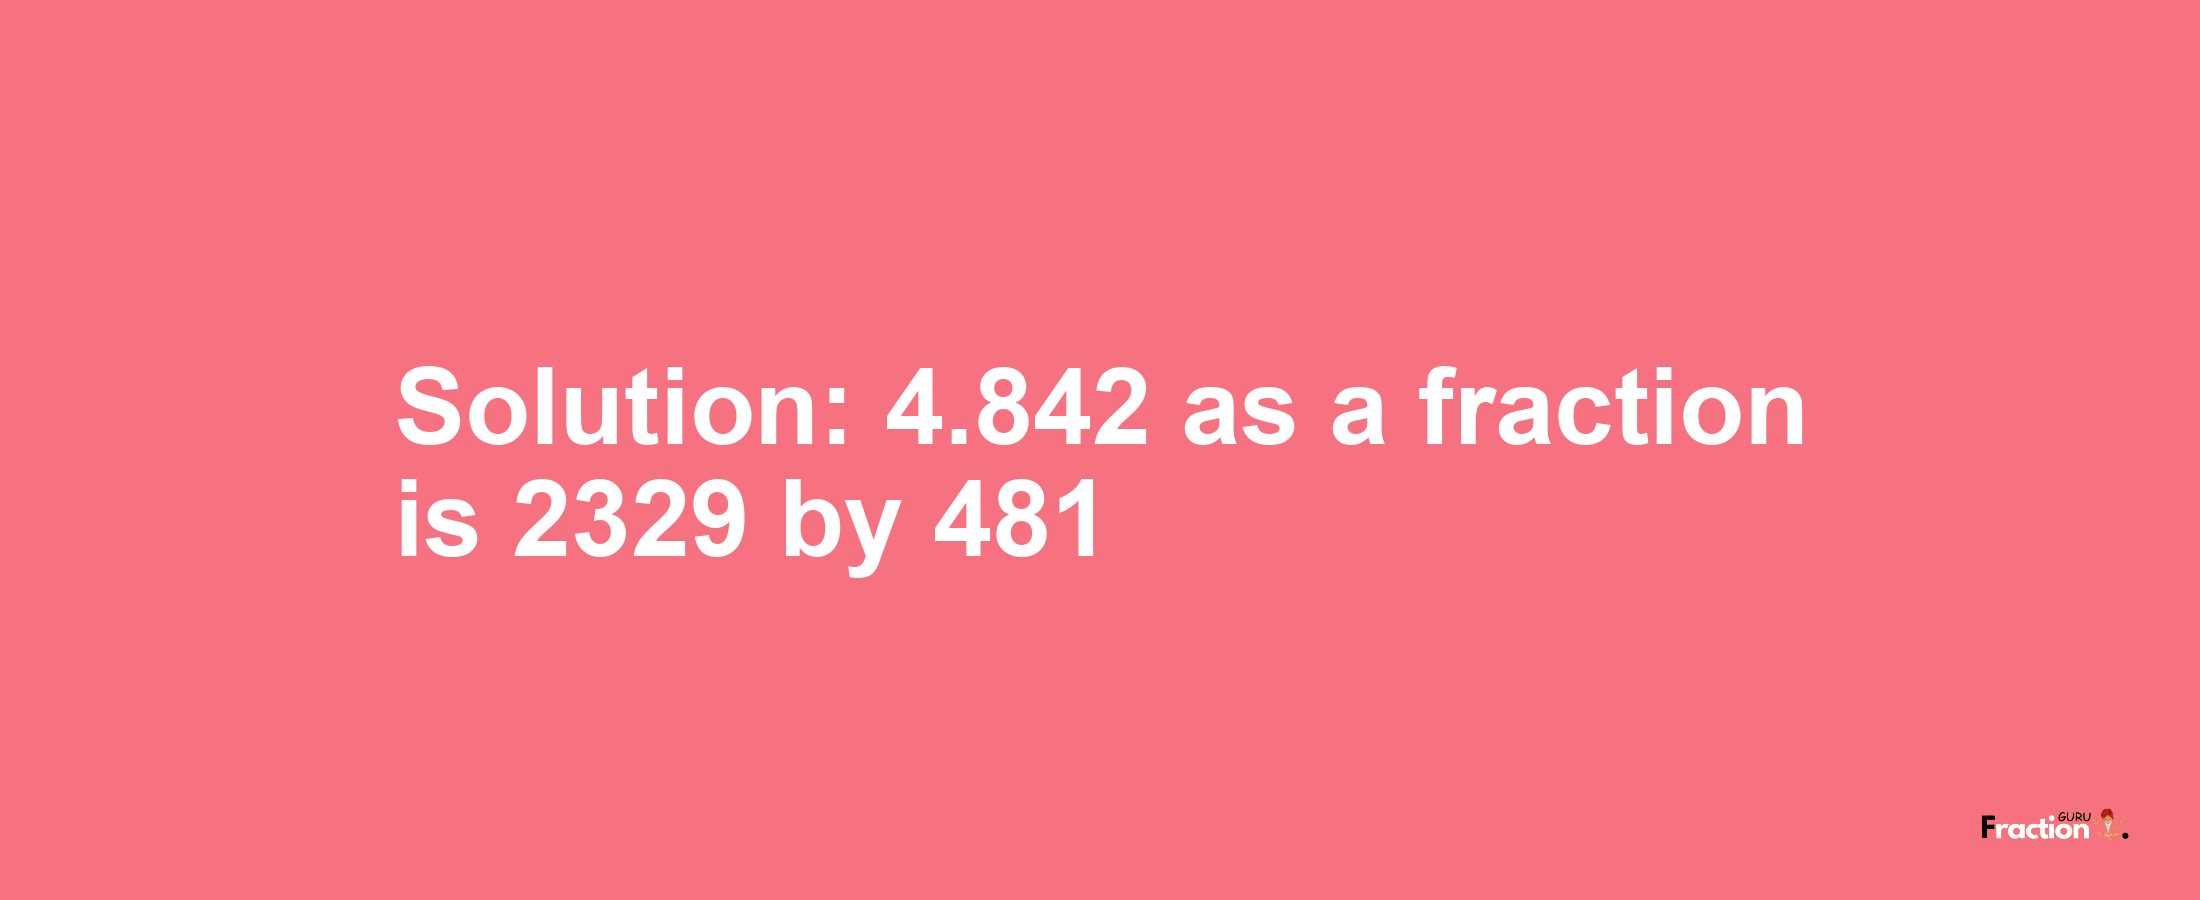 Solution:4.842 as a fraction is 2329/481